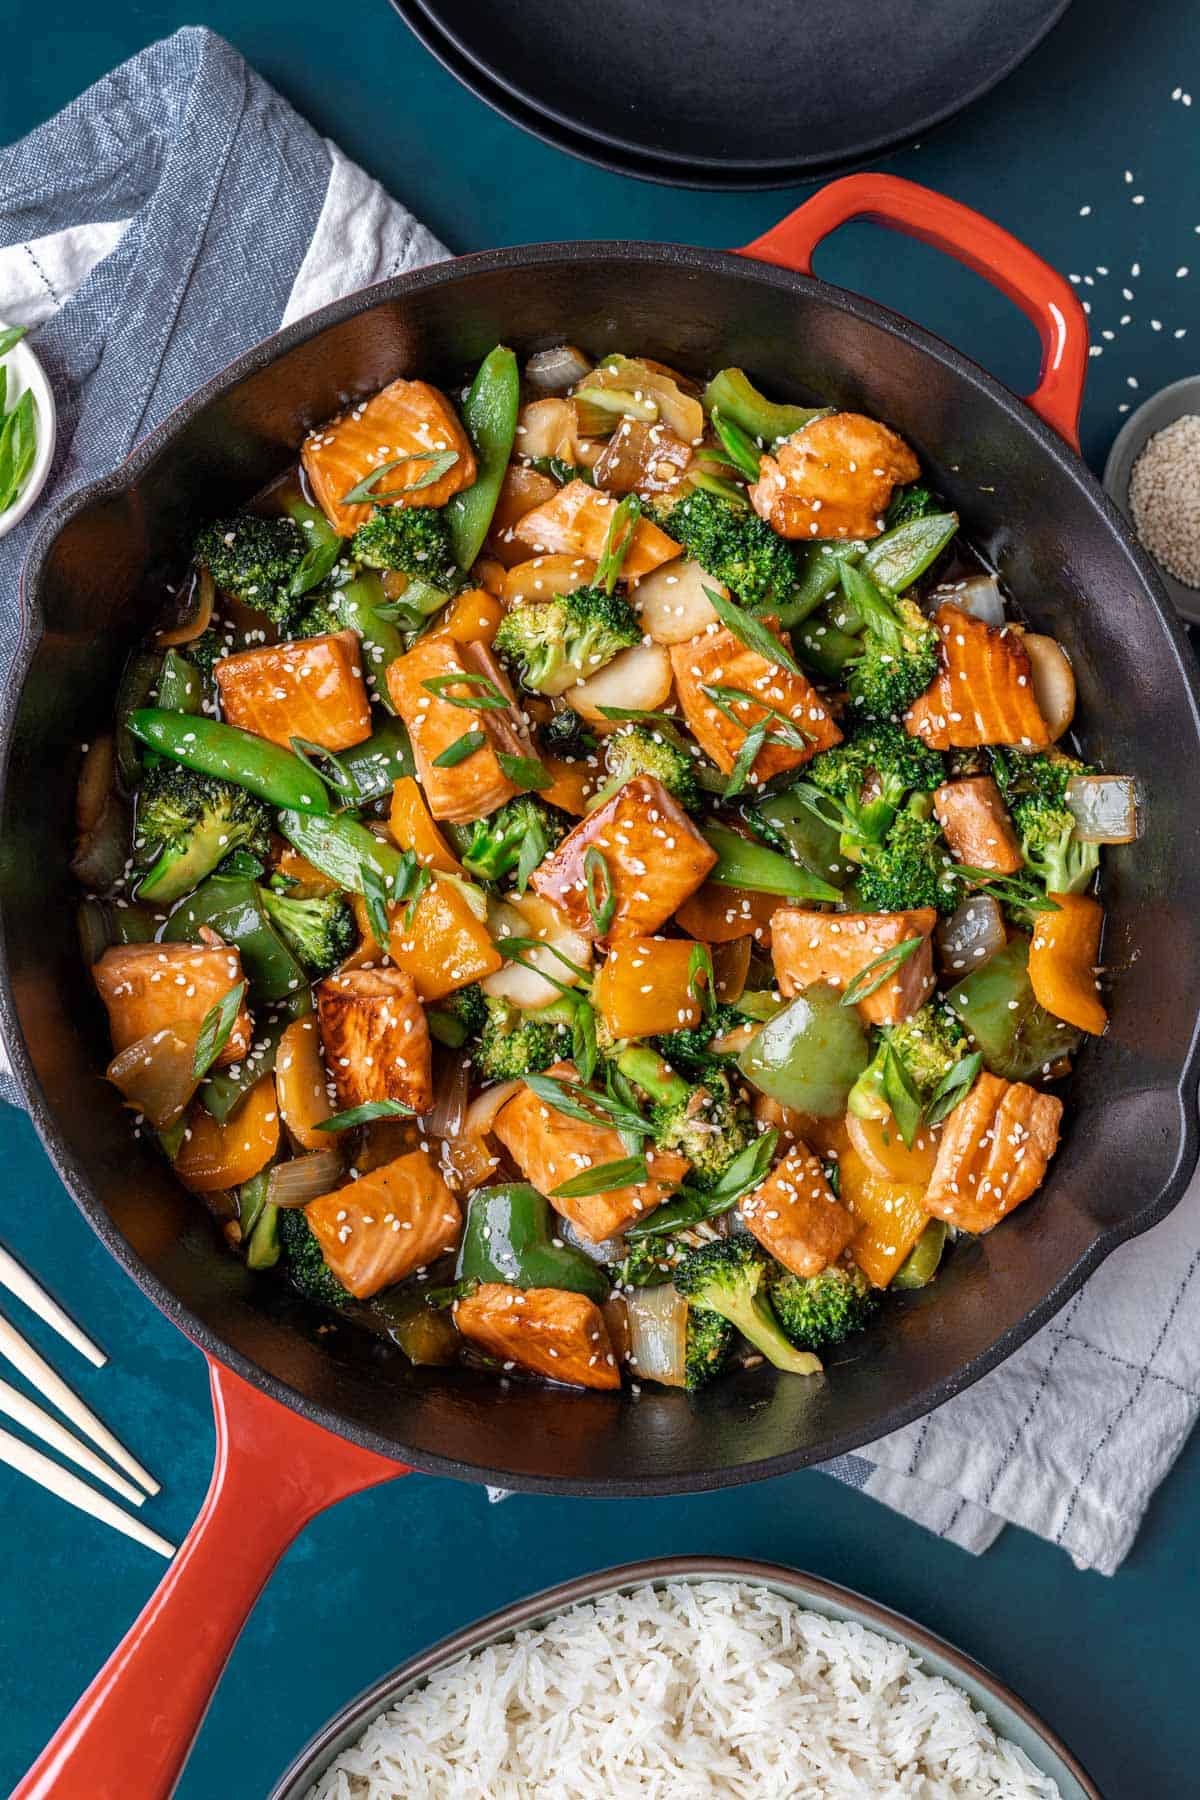 Teriyaki salmon stir fry garnished with green onions and sesame seeds in a large skillet.